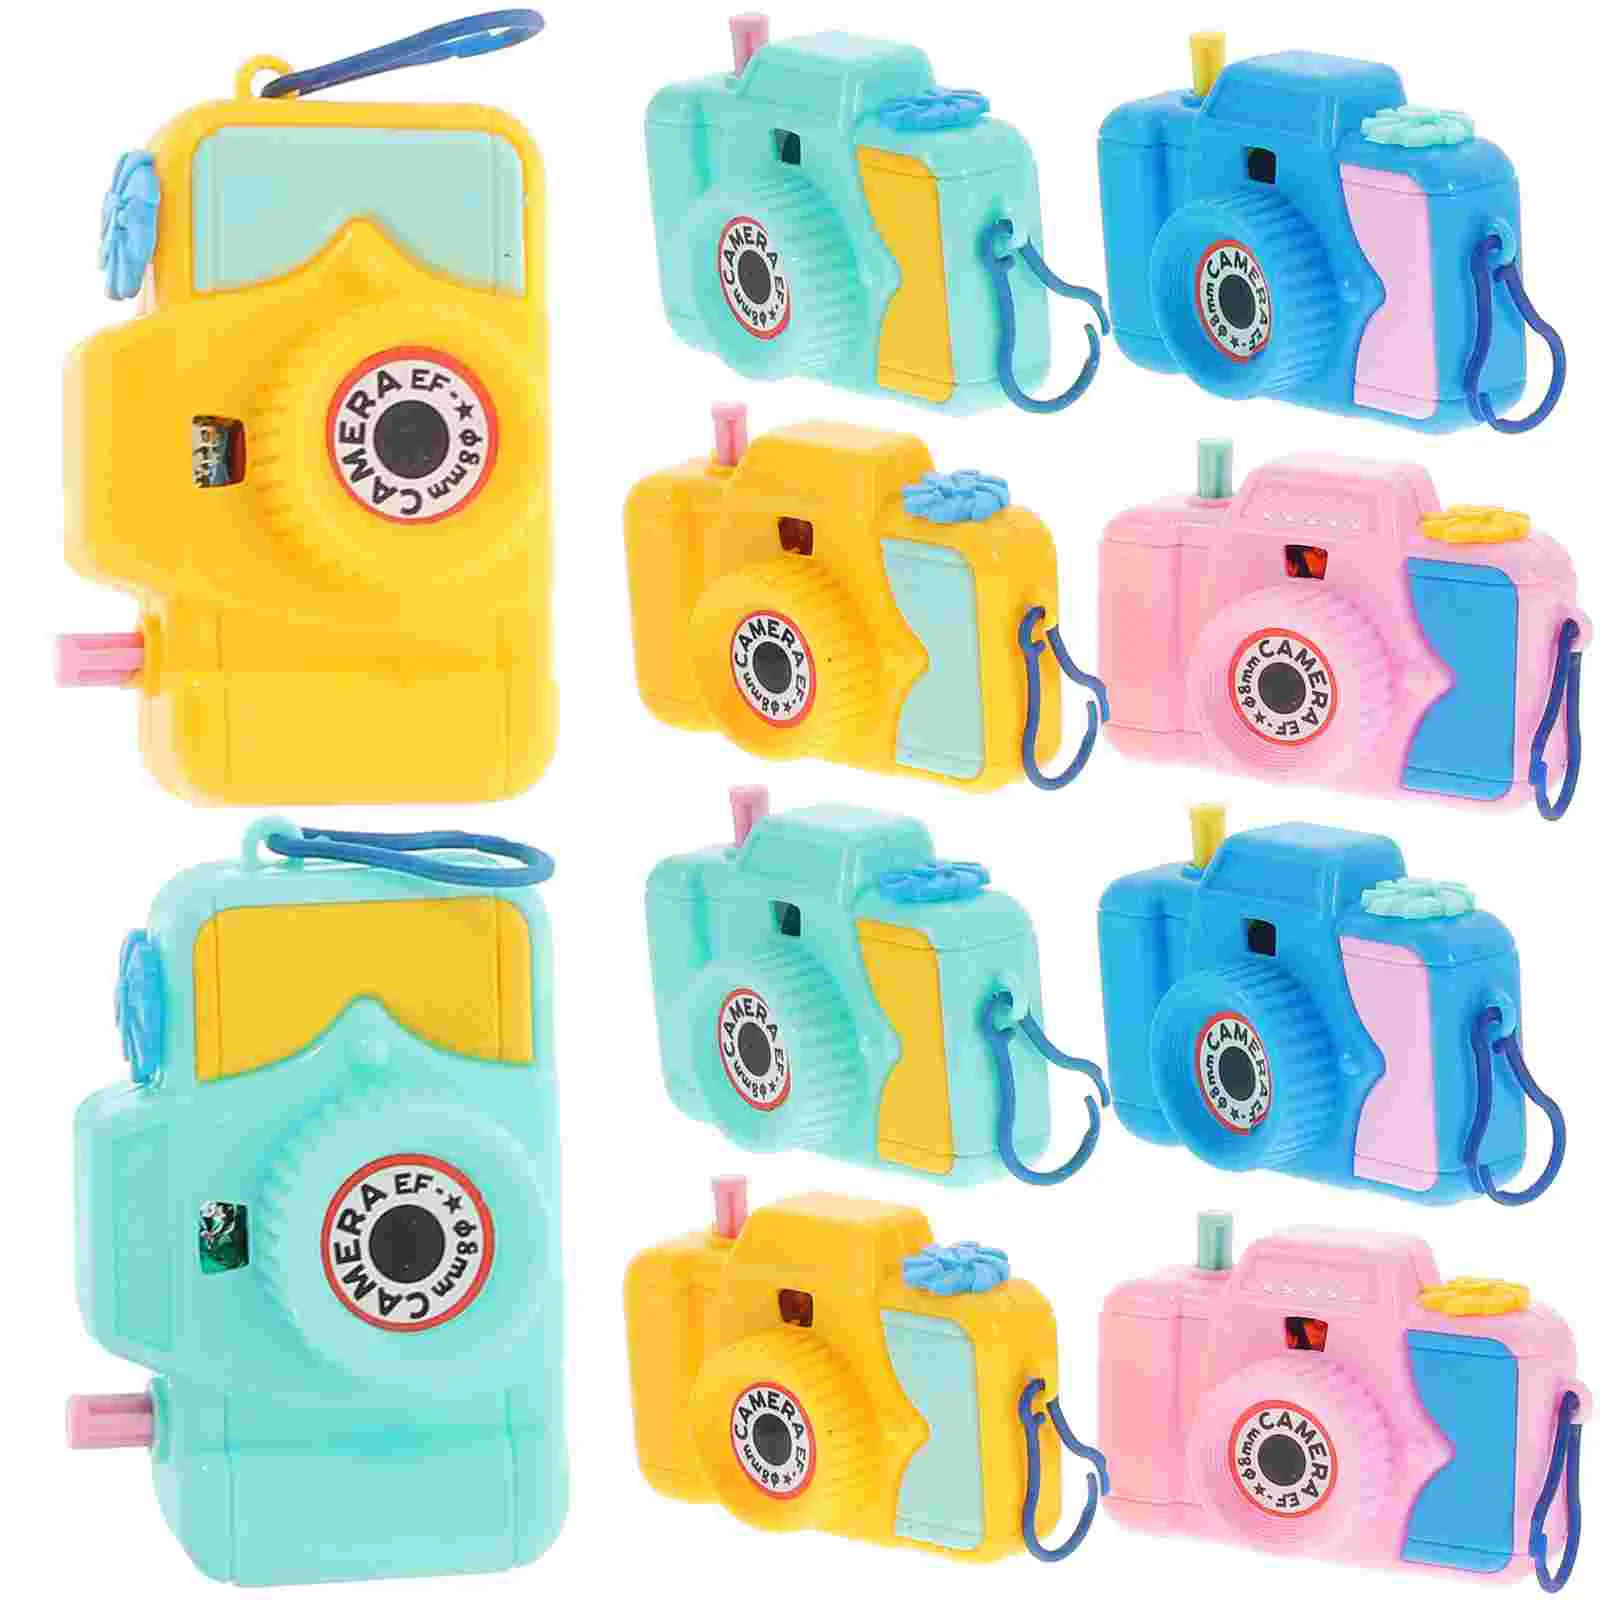 

10 Pcs Simulation Camera Toy Plaything Kids Toy Viewing Cartoon Projection Children's Educational Children's Toyss